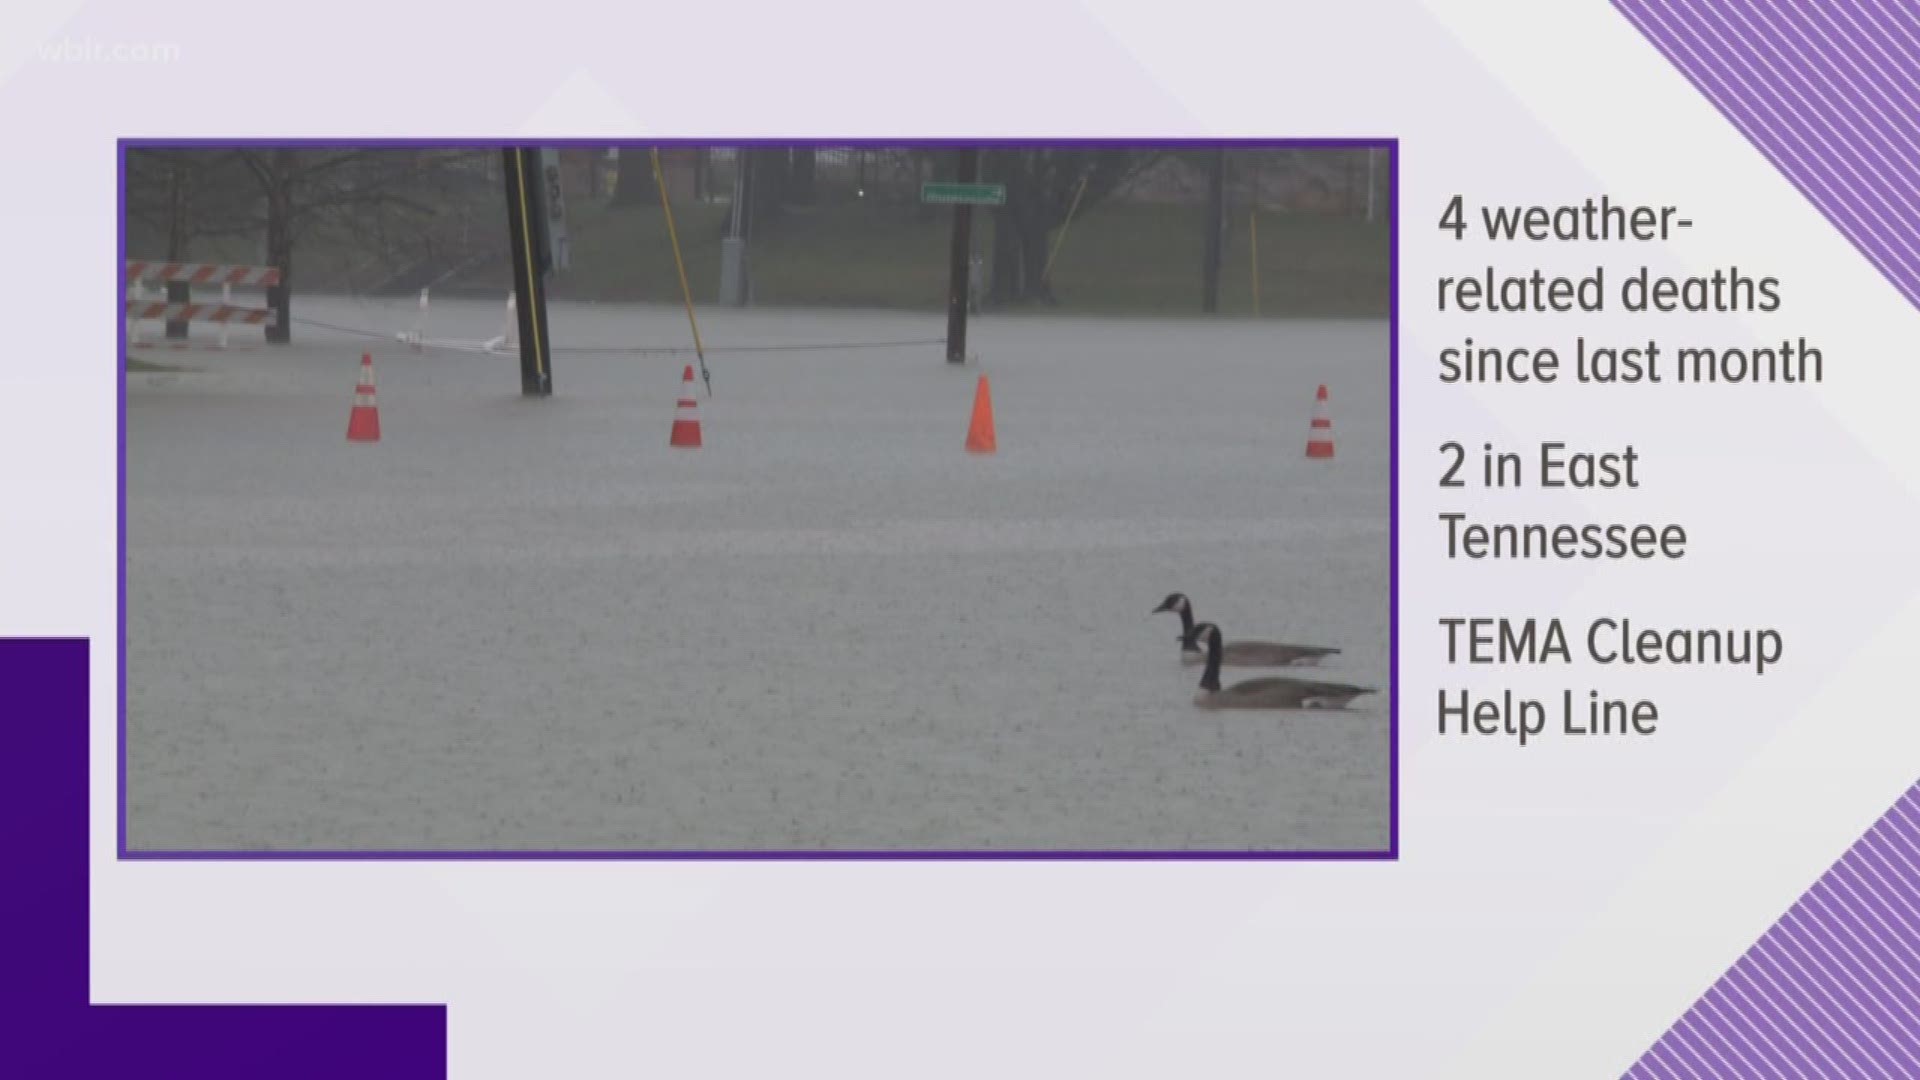 TEMA says that's due to flooding and the rain in the forecast.